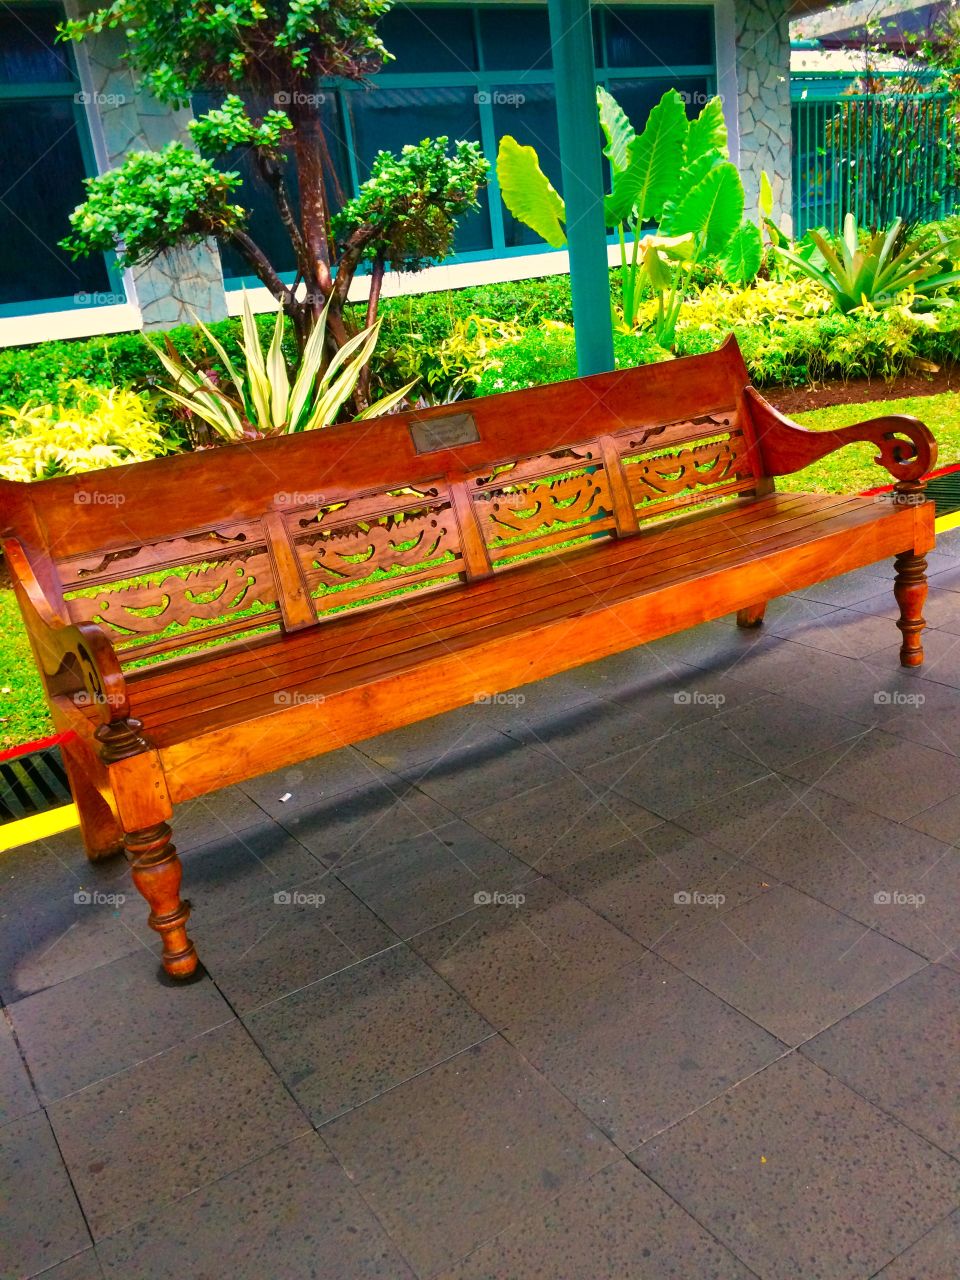 A park without benches is like an uninhabited forest. As small as the size of a park bench, this one equipment becomes important and must be in your home garden.

No need to be fancy and expensive, 4,Nov,2019 jakarta city indonesia